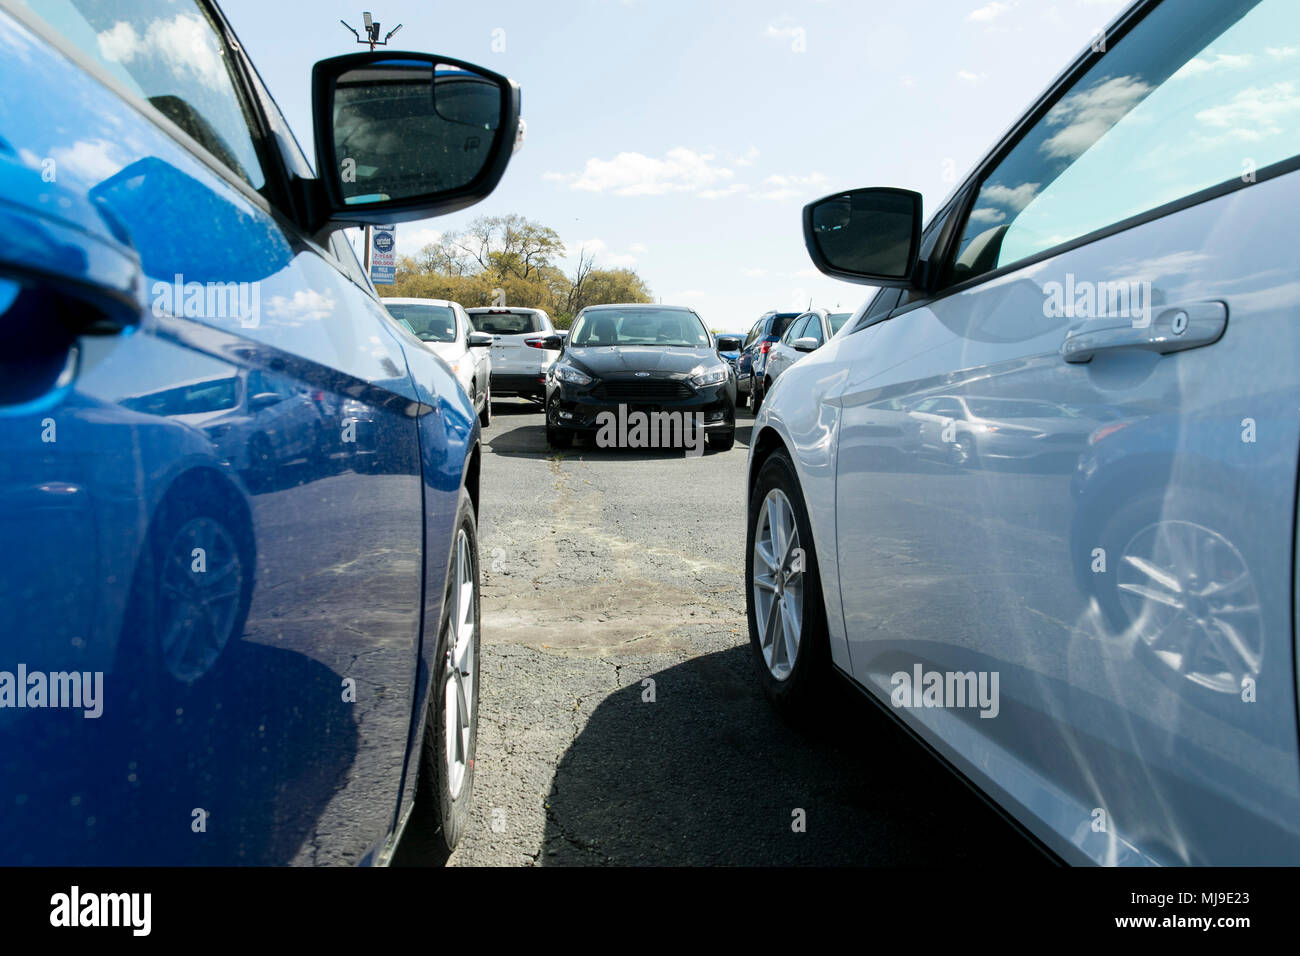 Ford Fiesta, Focus and Fusion passenger cars on a dealer lot in Seaford, Delaware on April 29, 2018. Stock Photo